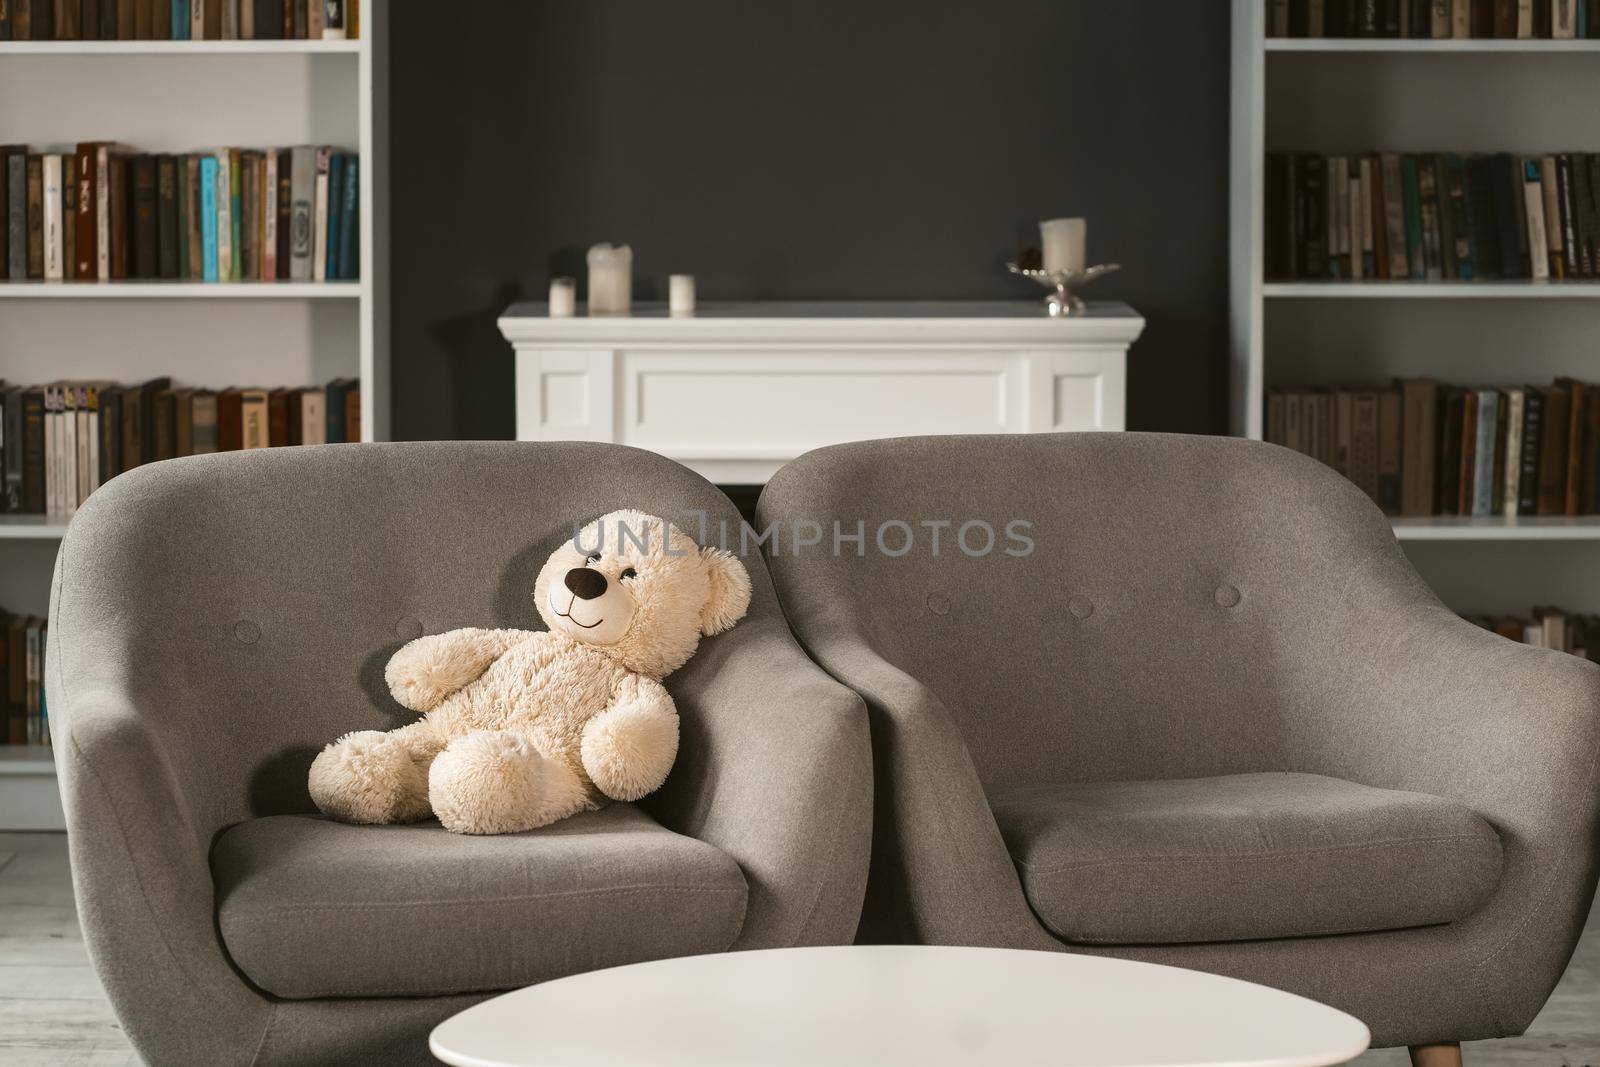 Teddy sitting on armchair. Teddy bear on grey chair next to empty one in interior. Beautiful living room with teddy bear on chair.